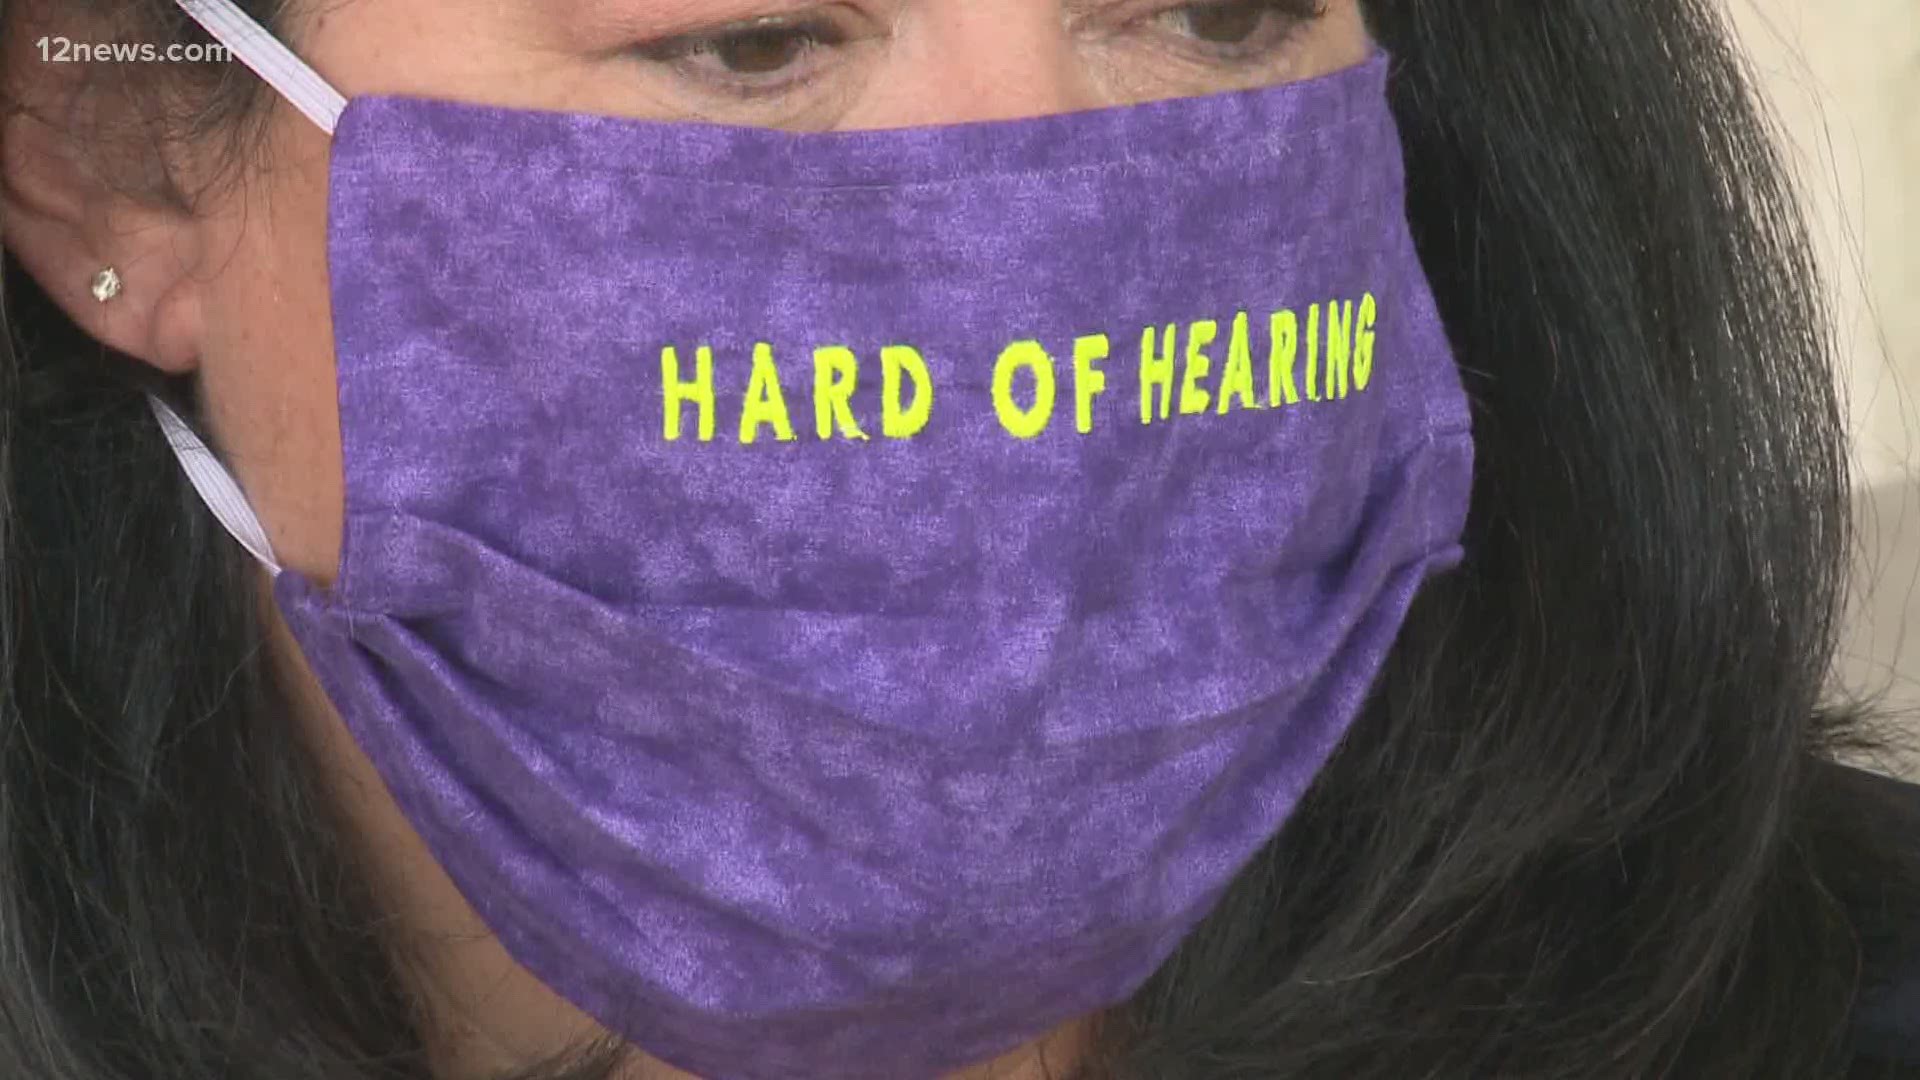 Masks have made it difficult for the hearing-impaired to understand people. But, one Goodyear woman found a work-around.